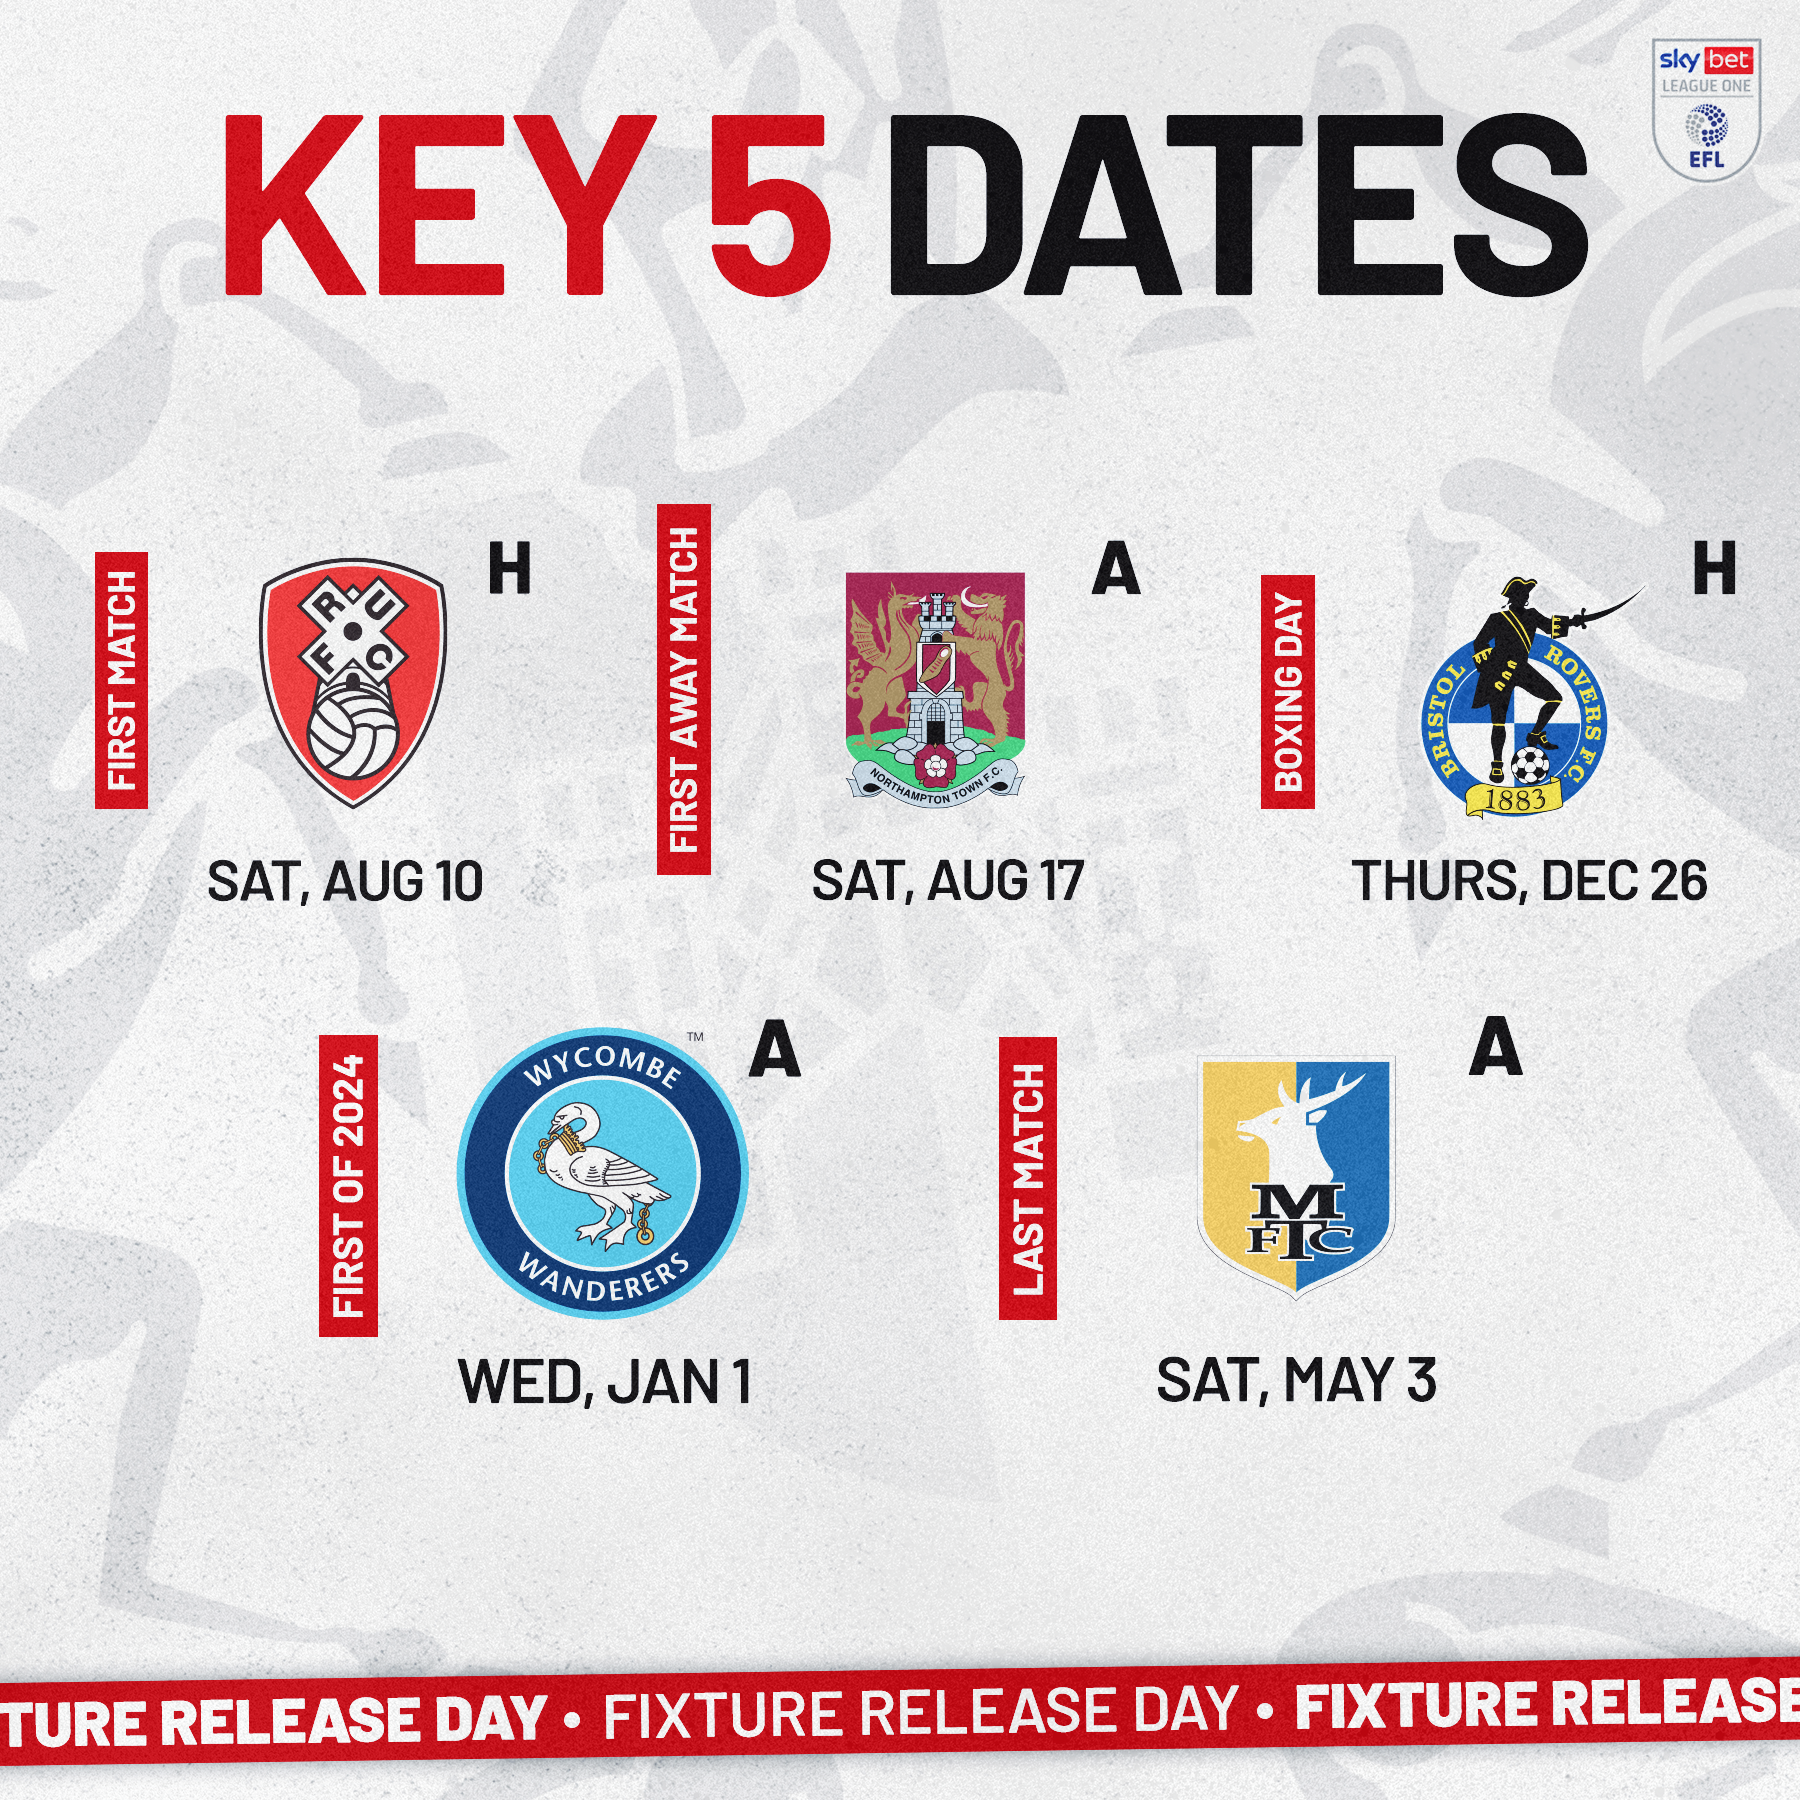 Square image of key dates showing the badges of Rotherham, Northampton, Bristol Rovers, Wycombe Wanderers and Mansfield Town. 